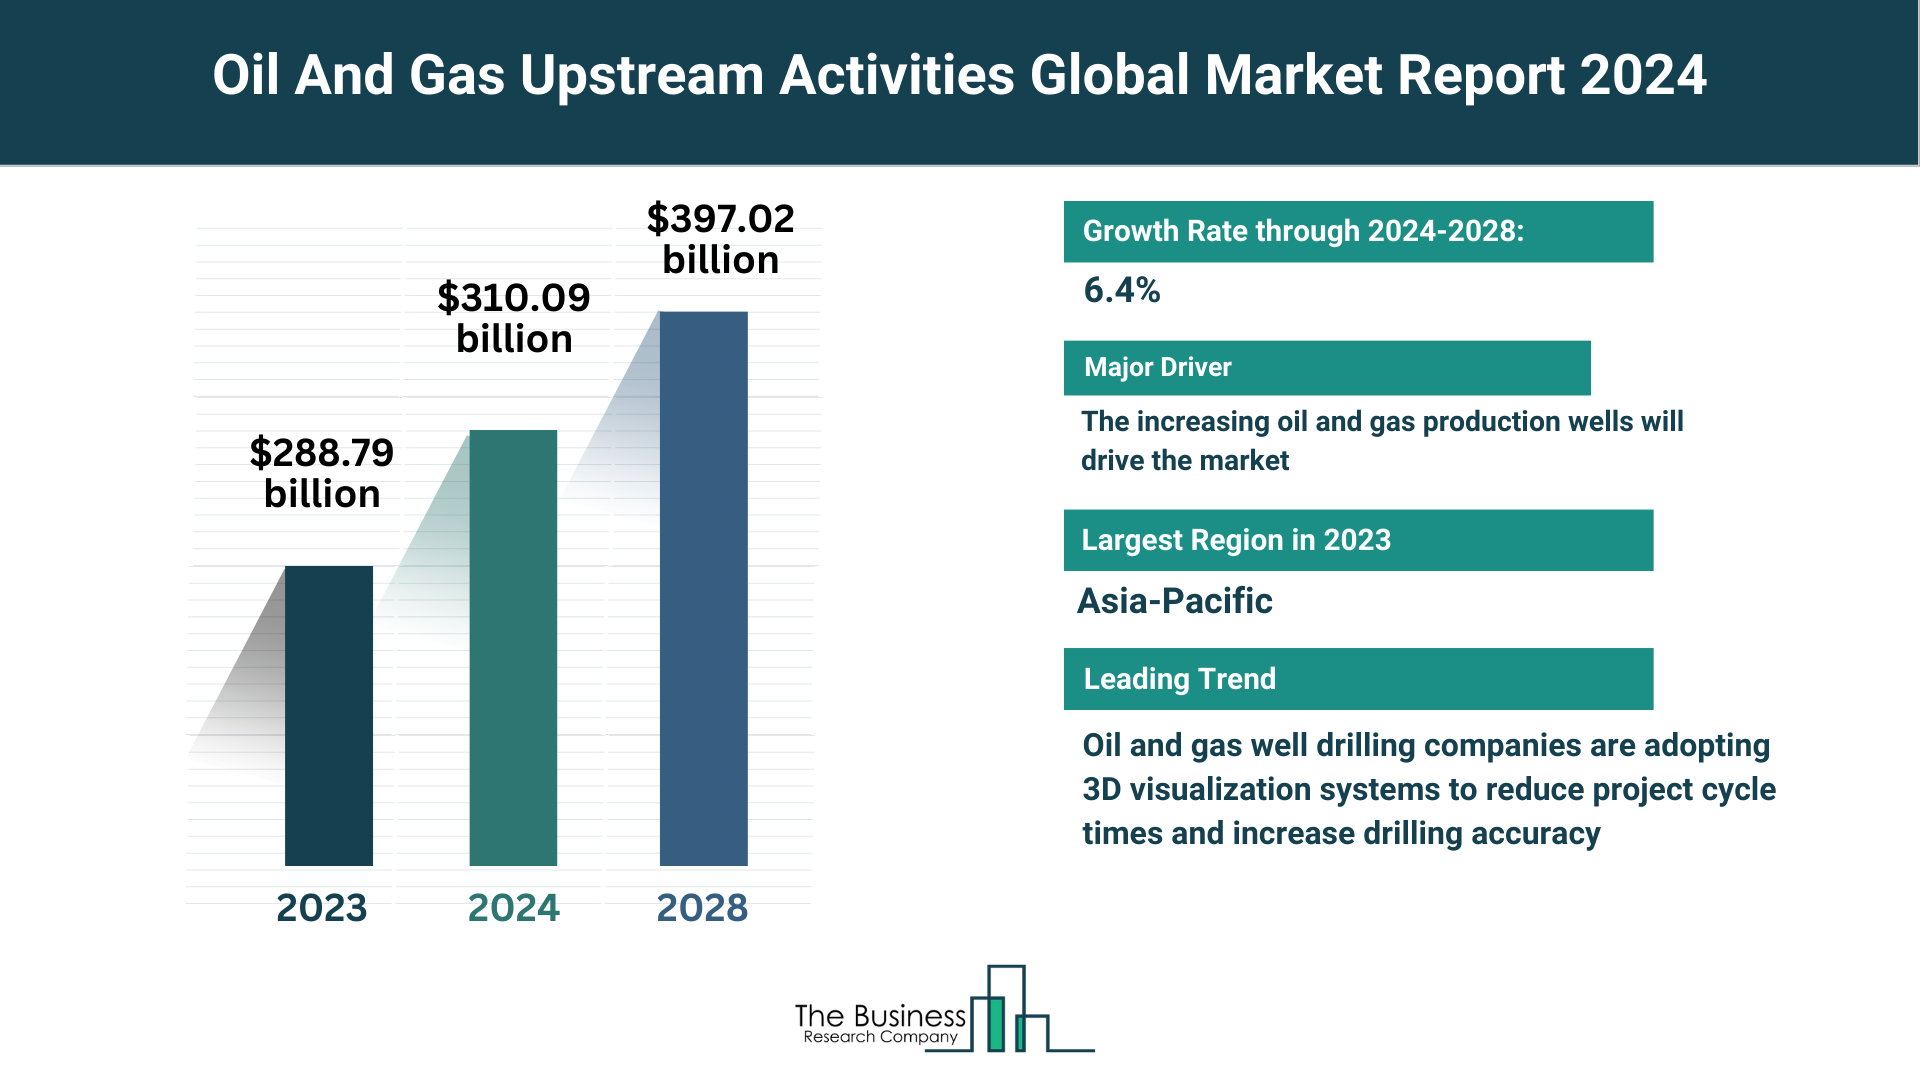 Global Oil And Gas Upstream Activities Market